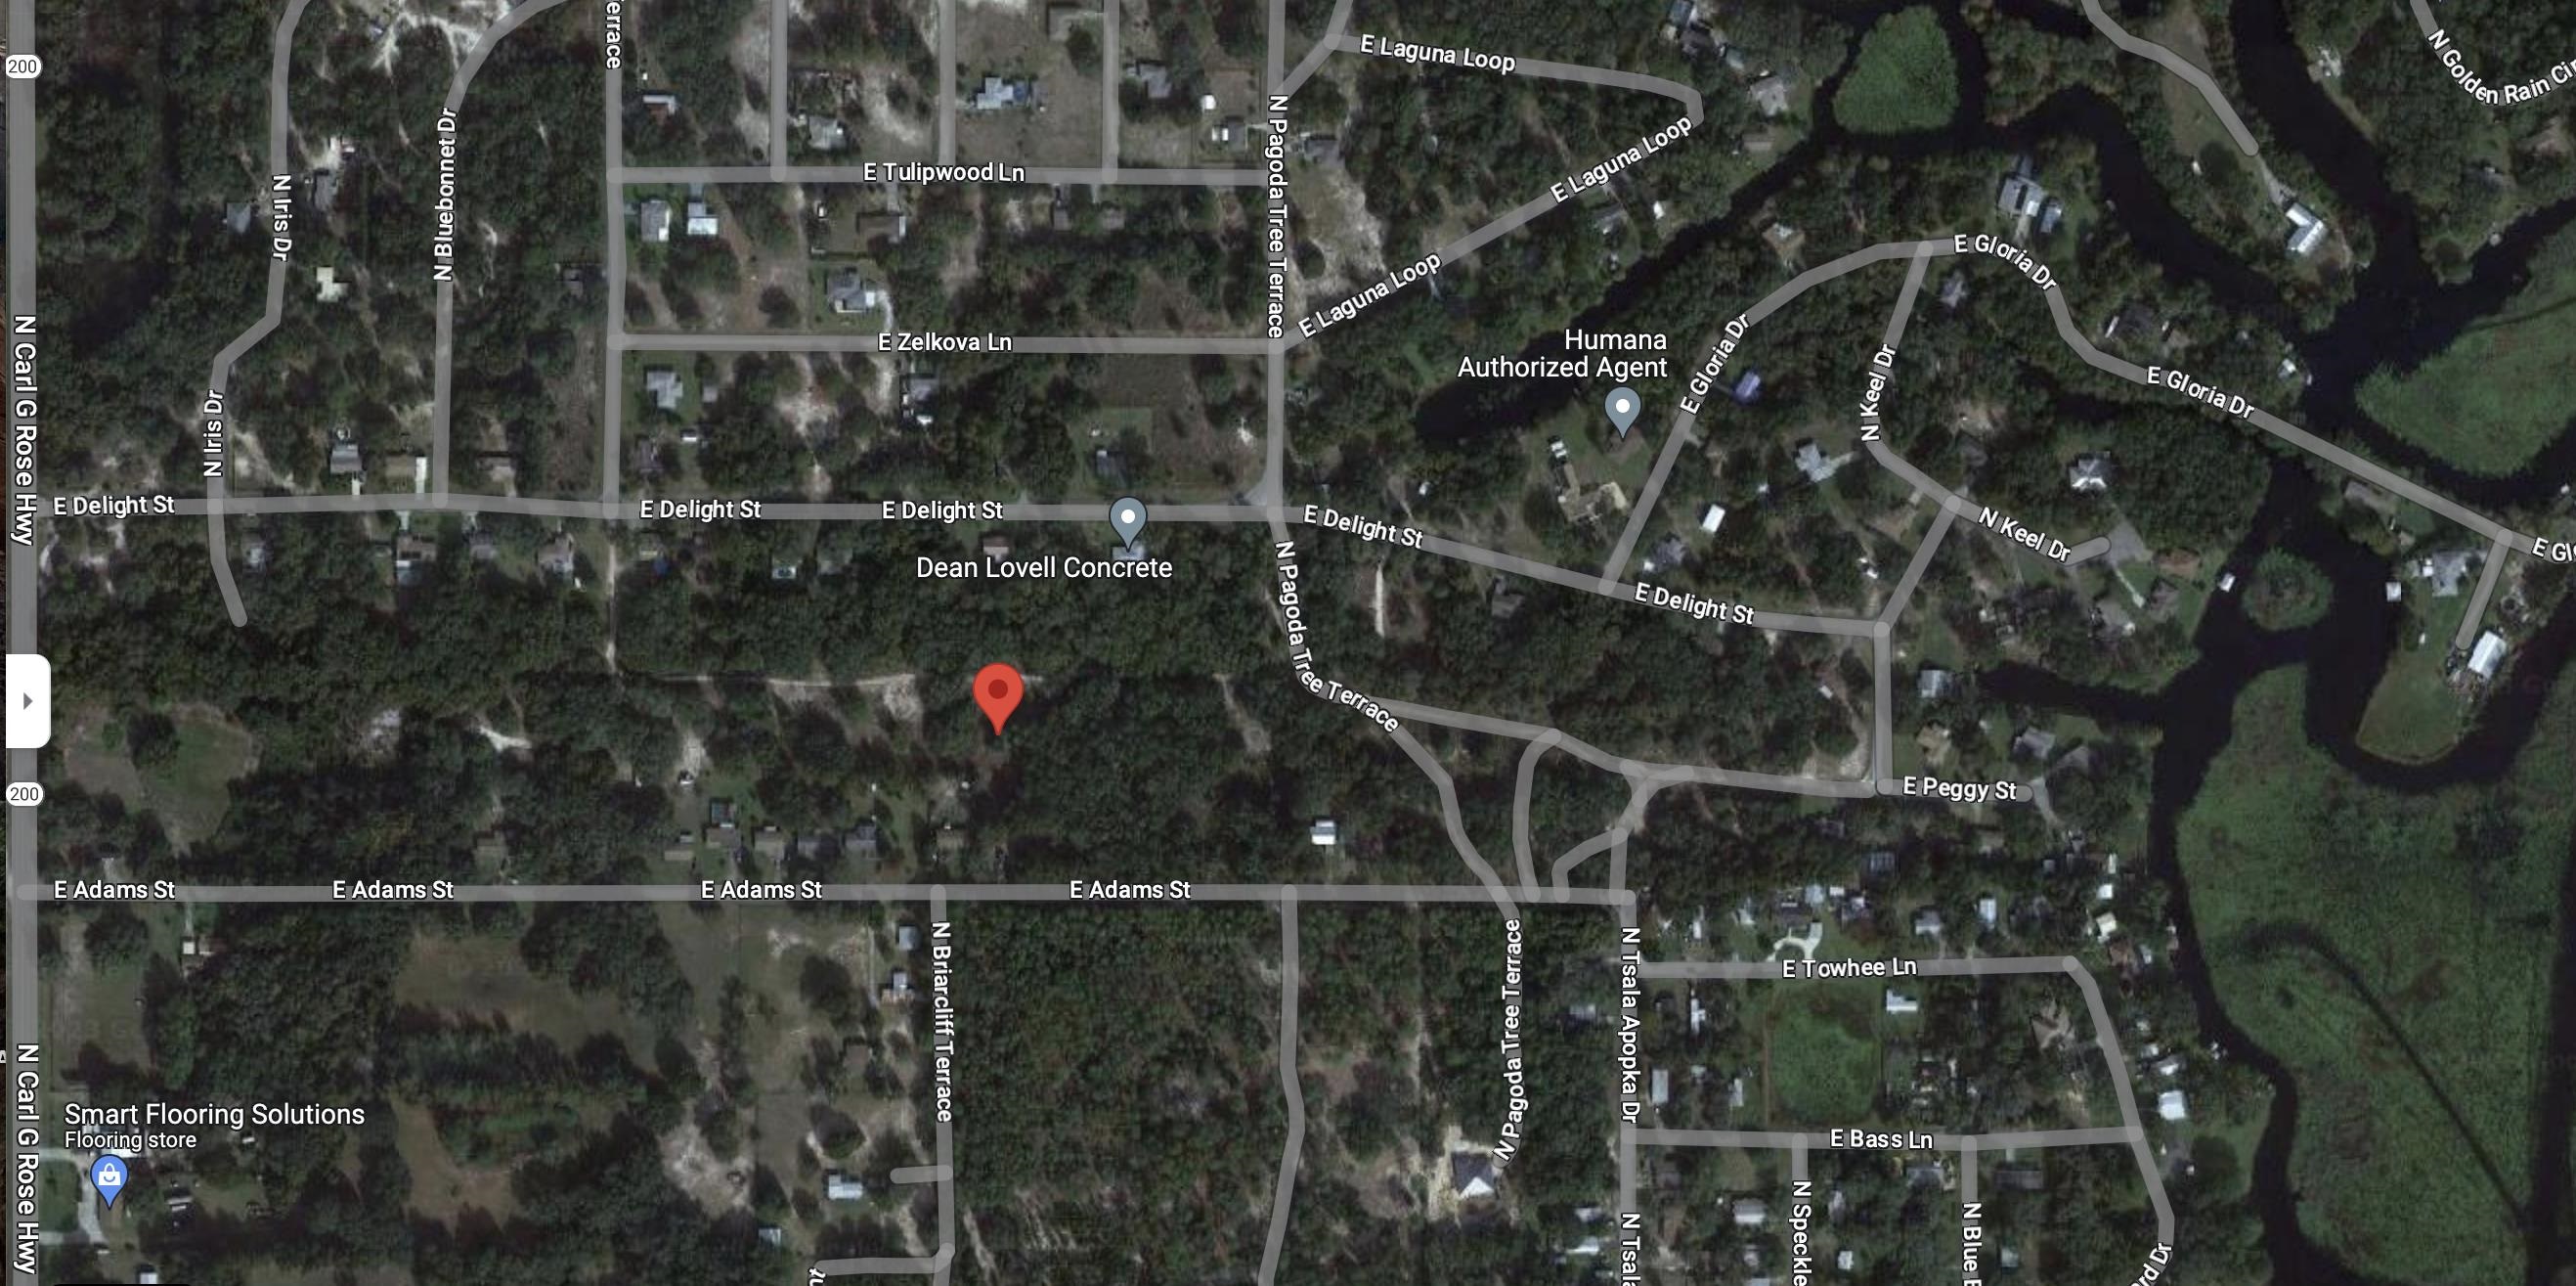 3724 PEGGY ST,OTHER FLORIDA,Florida 34442,Lots and land,PEGGY ST,1,363060